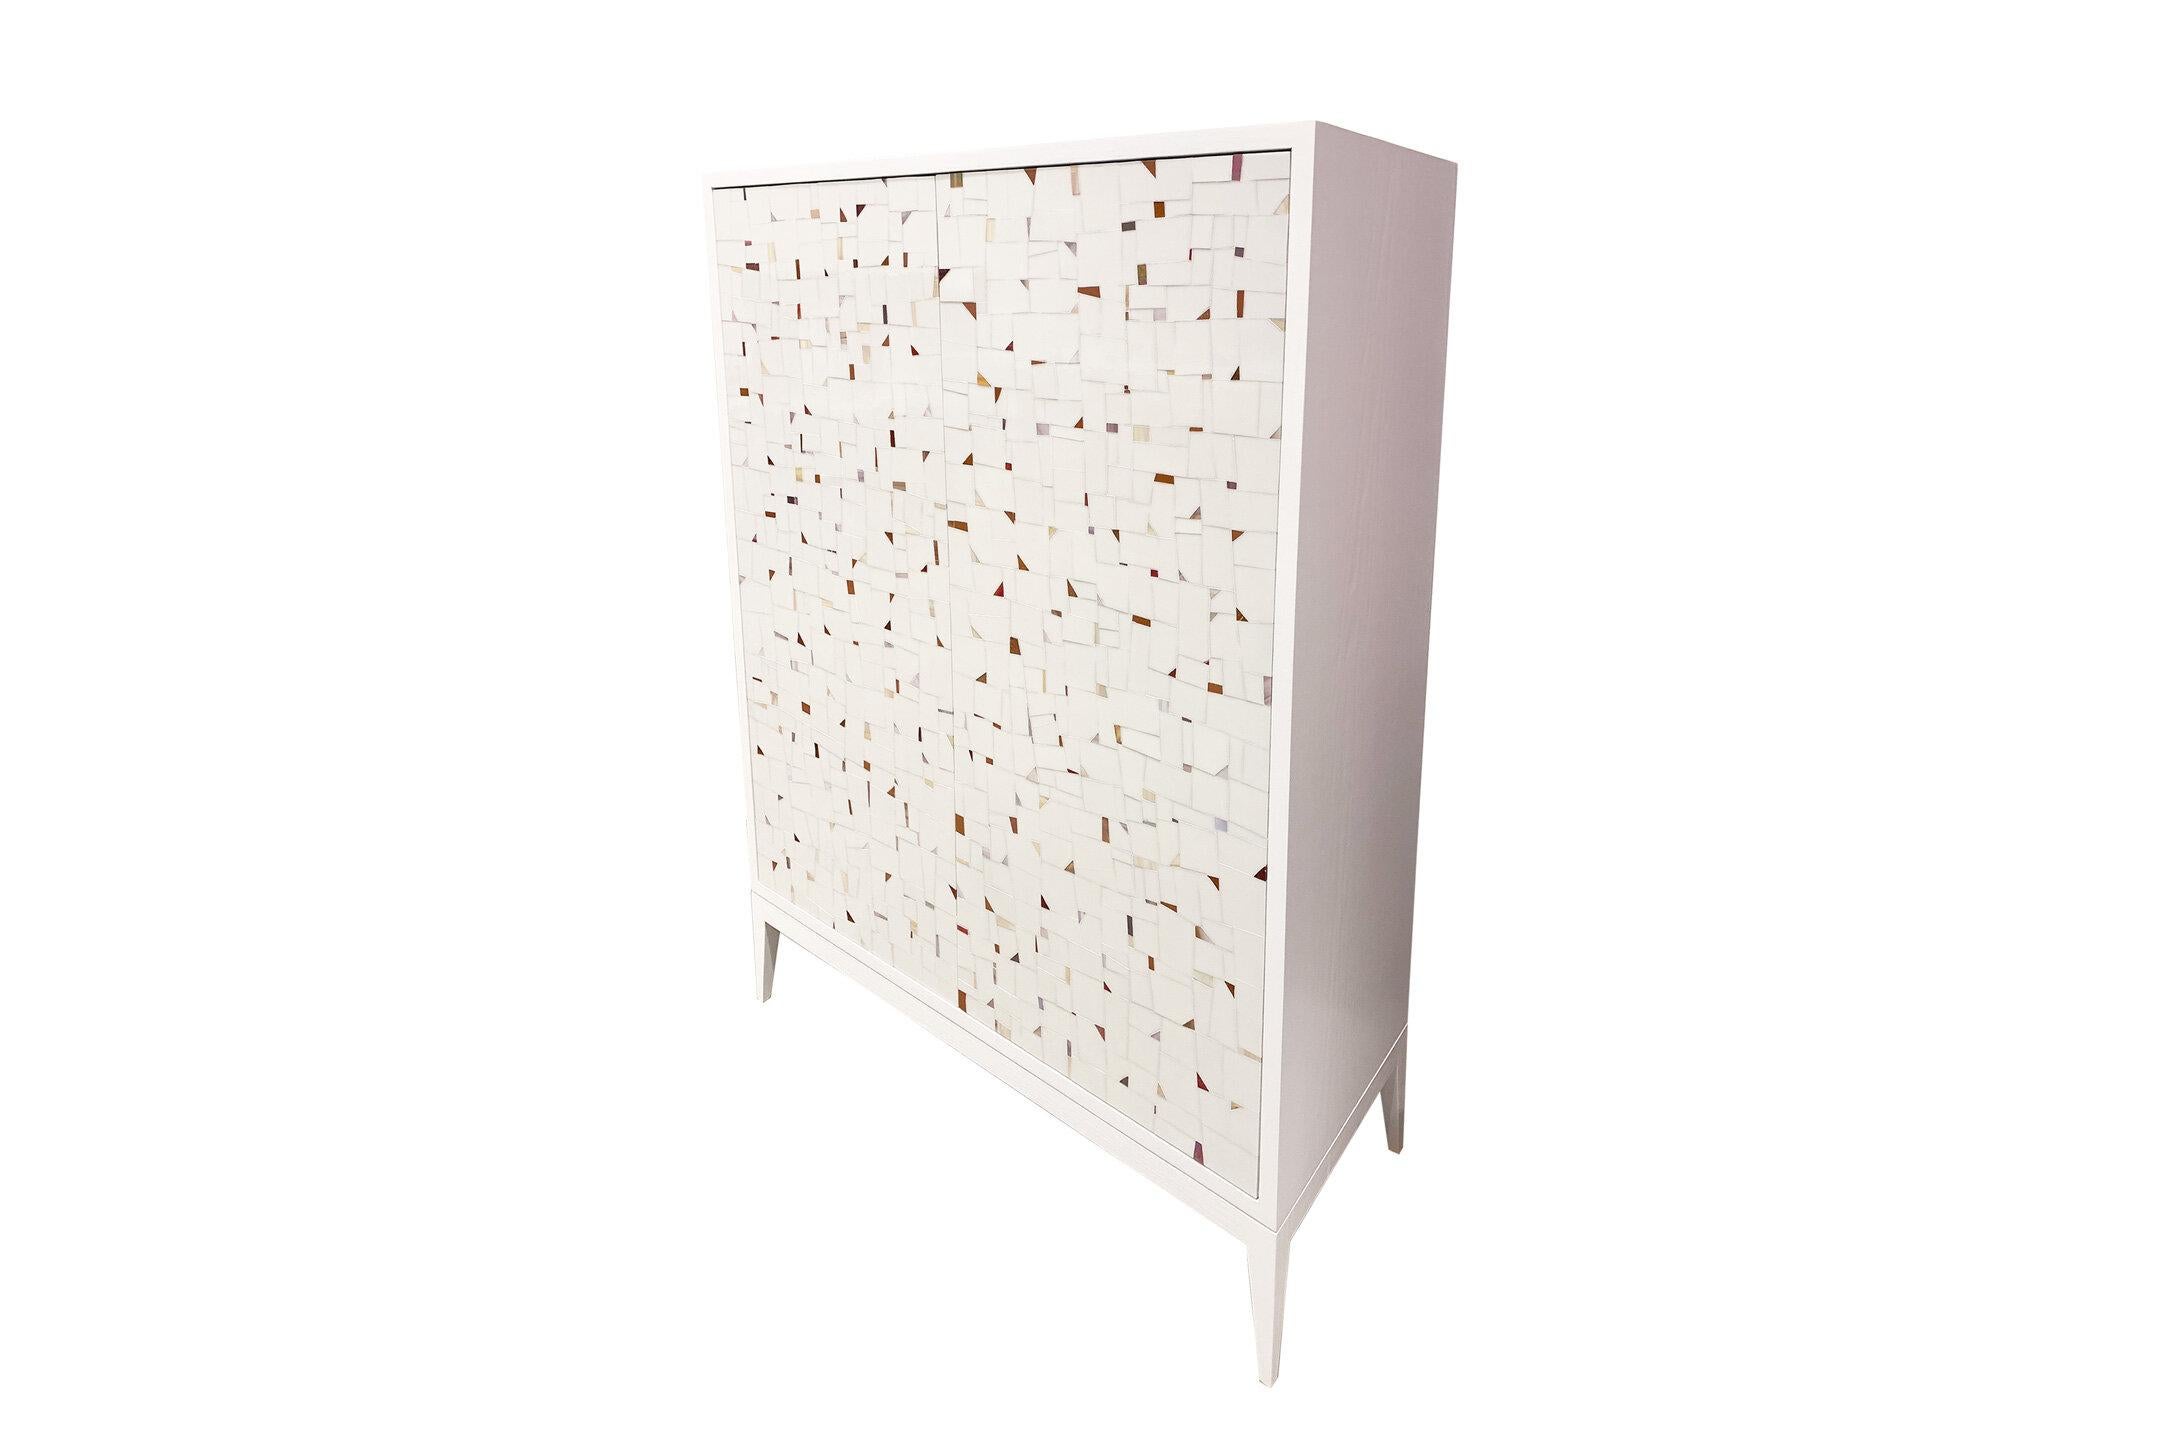 The Milano Terrazzo 2-door bar cabinet by Ercole Home is a 2 door touch latch bar cabinet that is outfitted with two pull out drawers, four interior shelves for storage space, and a wine glass holding rack on top. Perfect for anyone who loves